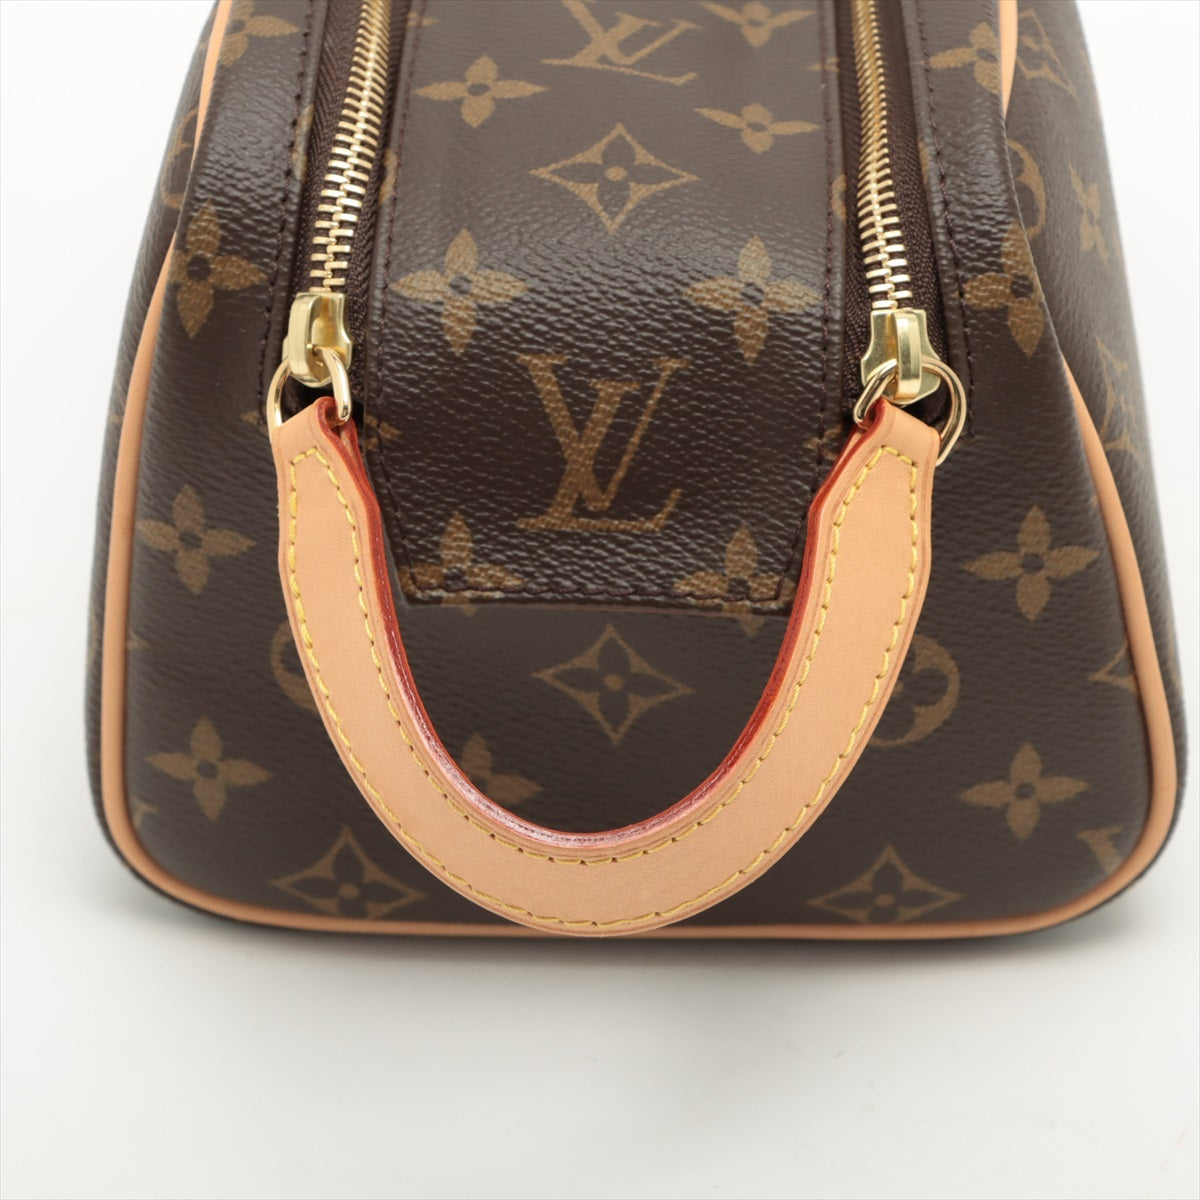 Louis Vuitton Monogram Dopp kit M44494 The back of the flap is peeled off